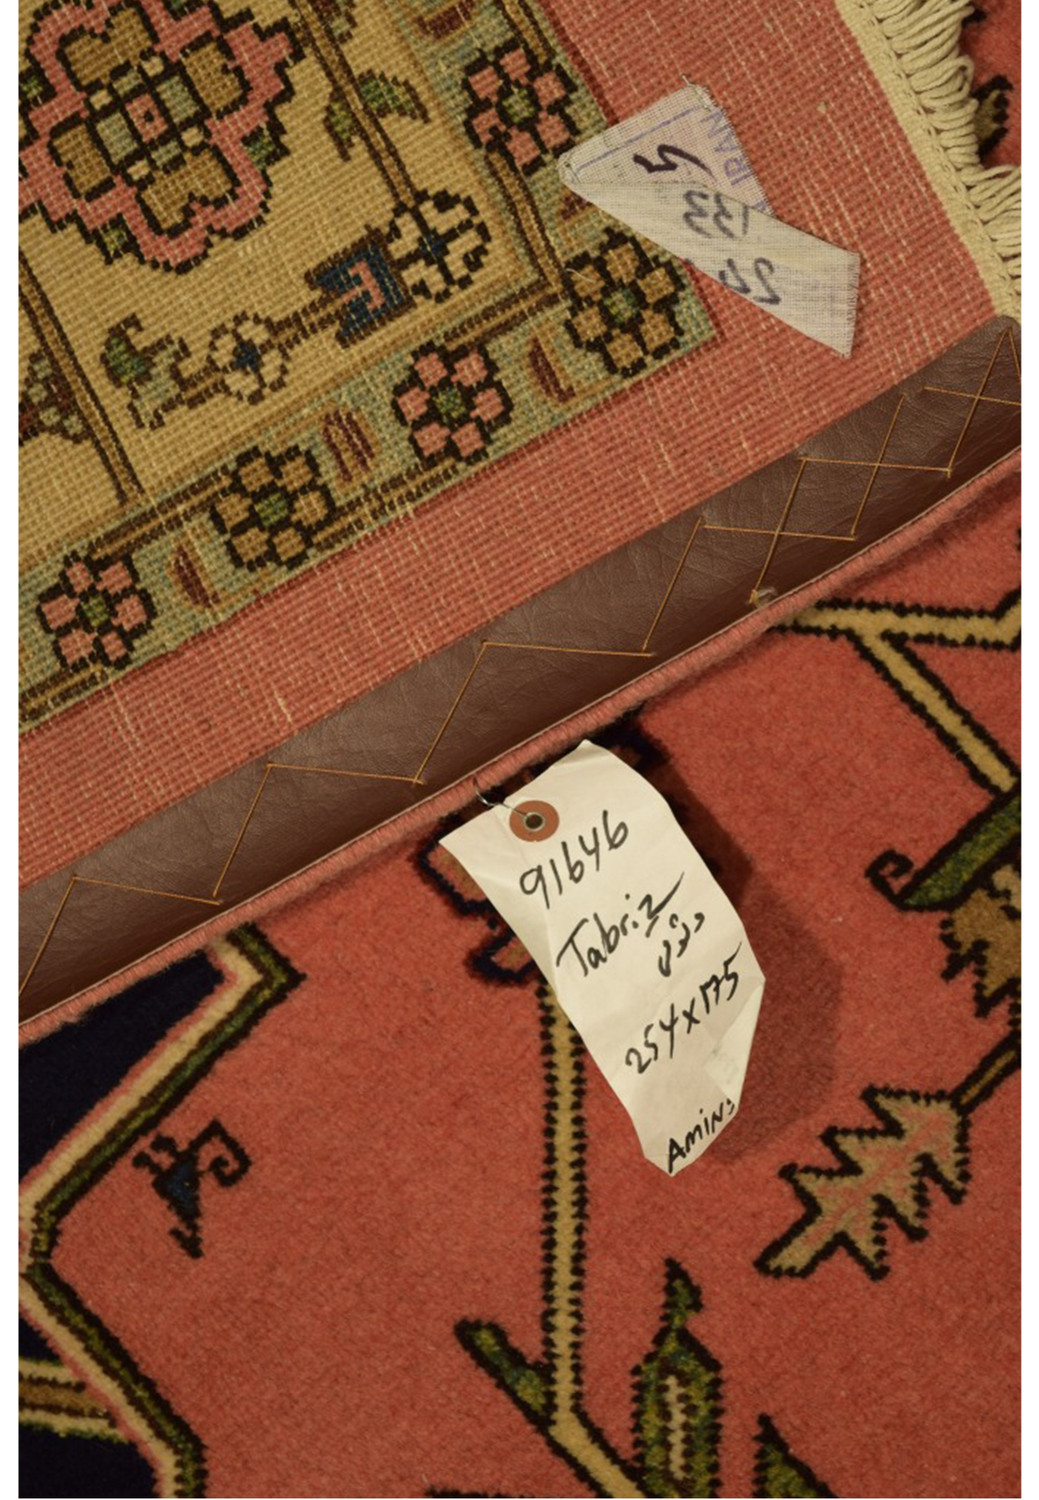 Image of a Persian Tabriz rug's label and corner, providing authenticity details with visible craftsmanship and fiber quality.